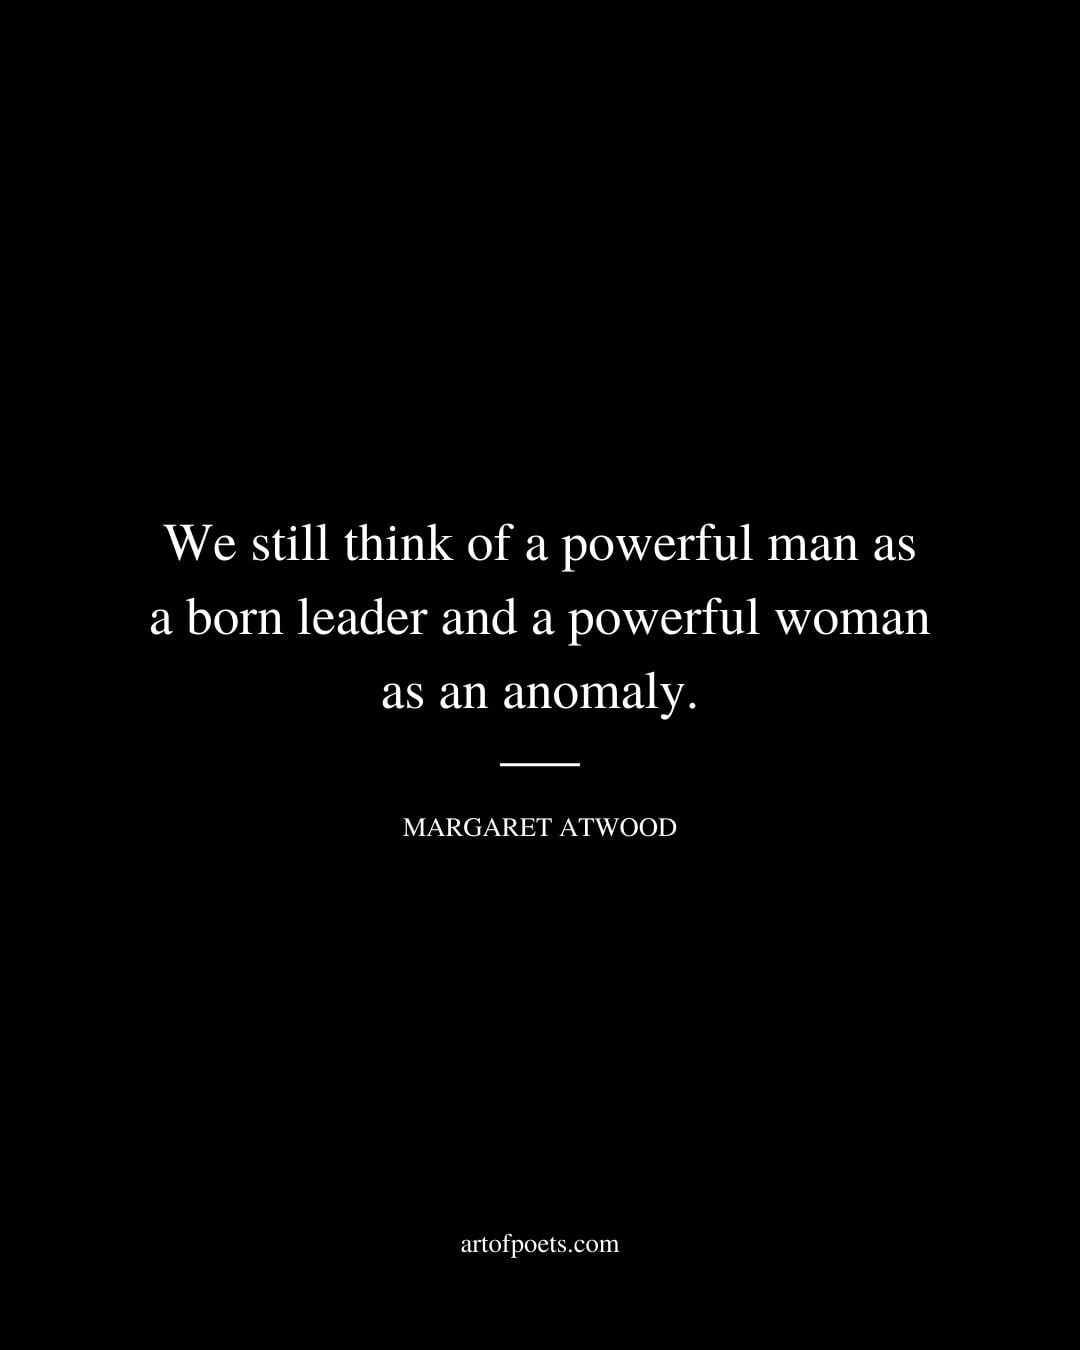 We still think of a powerful man as a born leader and a powerful woman as an anomaly. Margaret Atwood